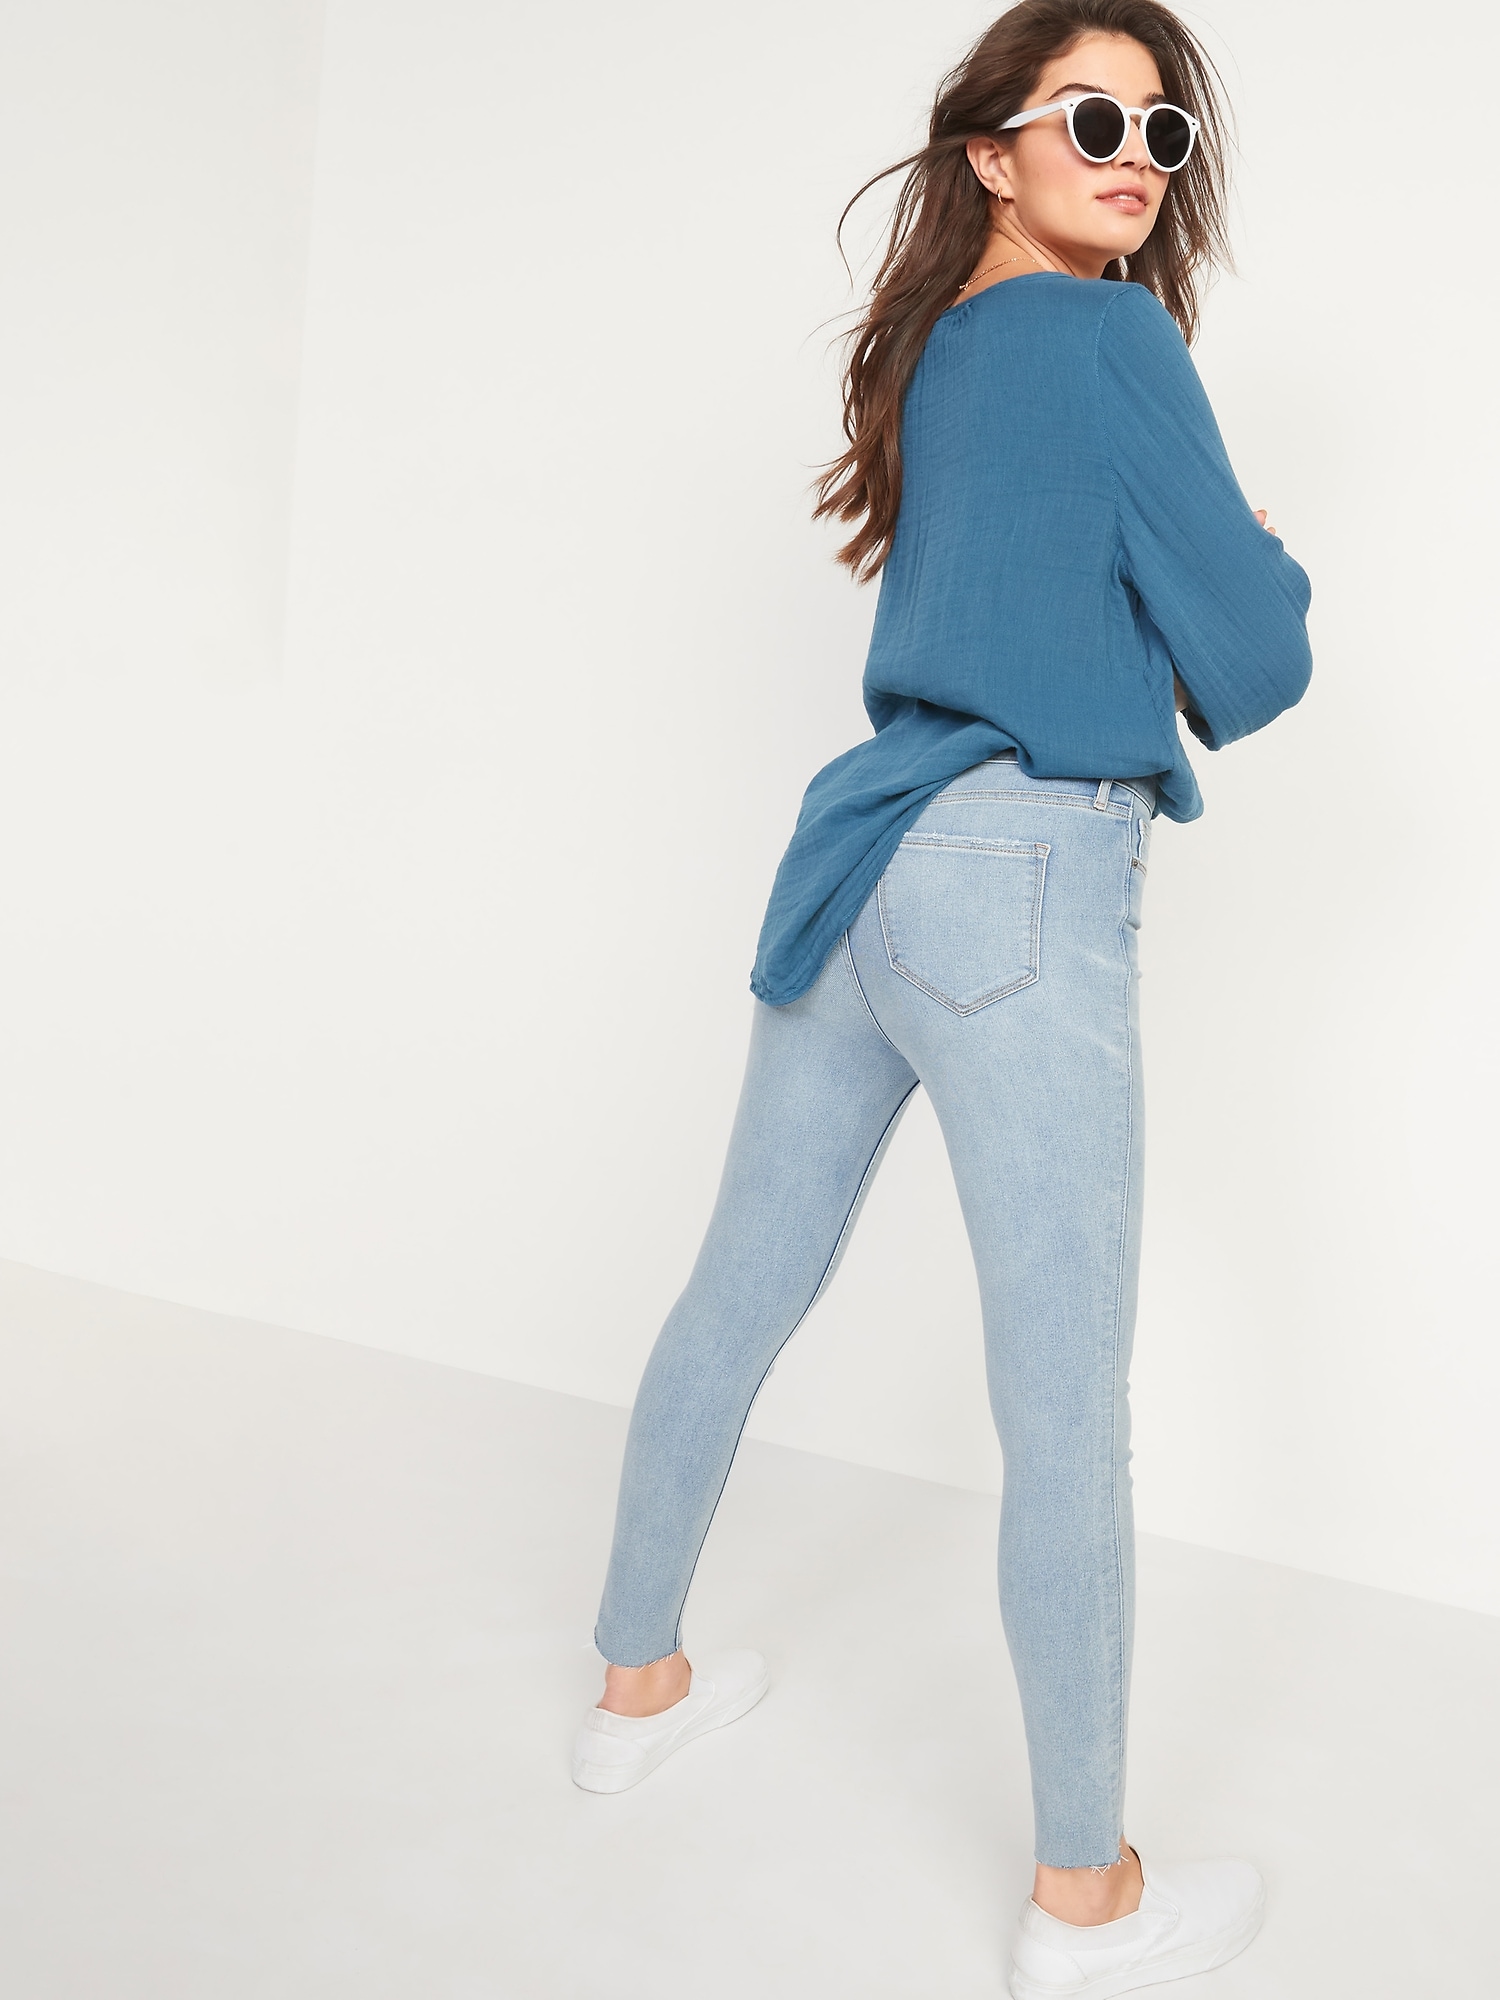 Cut-Off Jeans Stretch Super Women | Old Navy for Rockstar High-Waisted Skinny 360° Extra